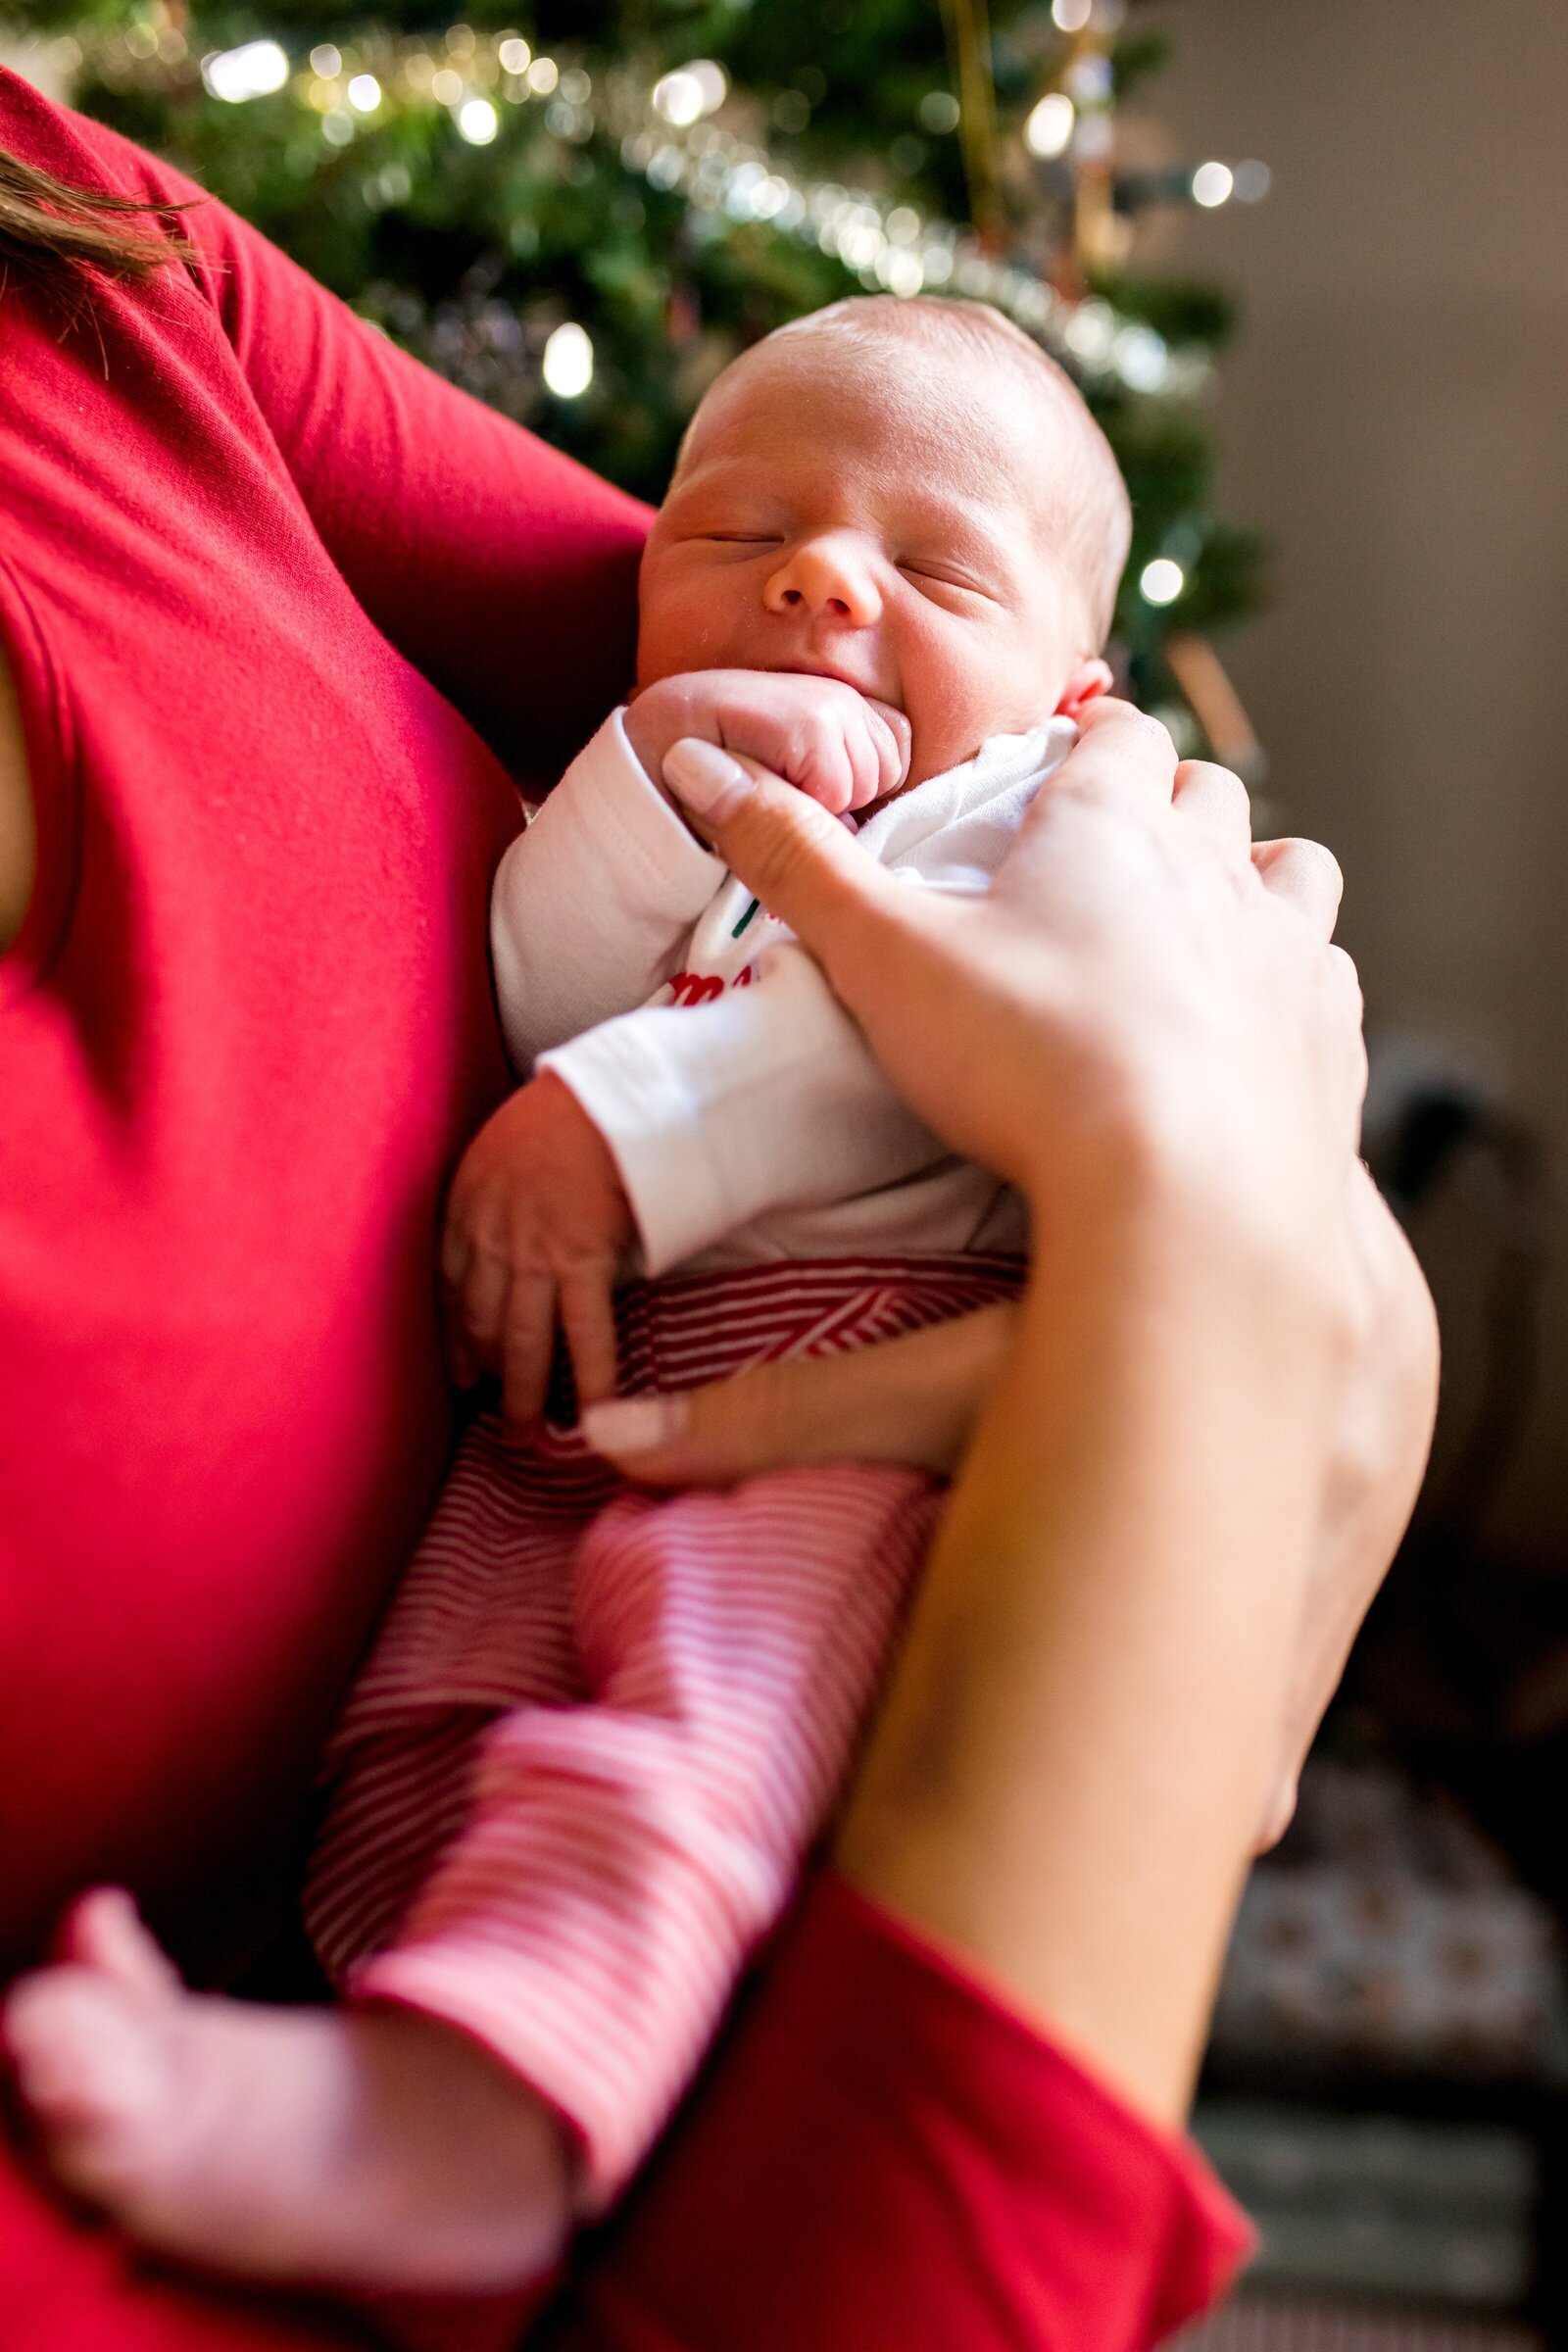 Newborn baby in mom's arm in front of Christmas tree.